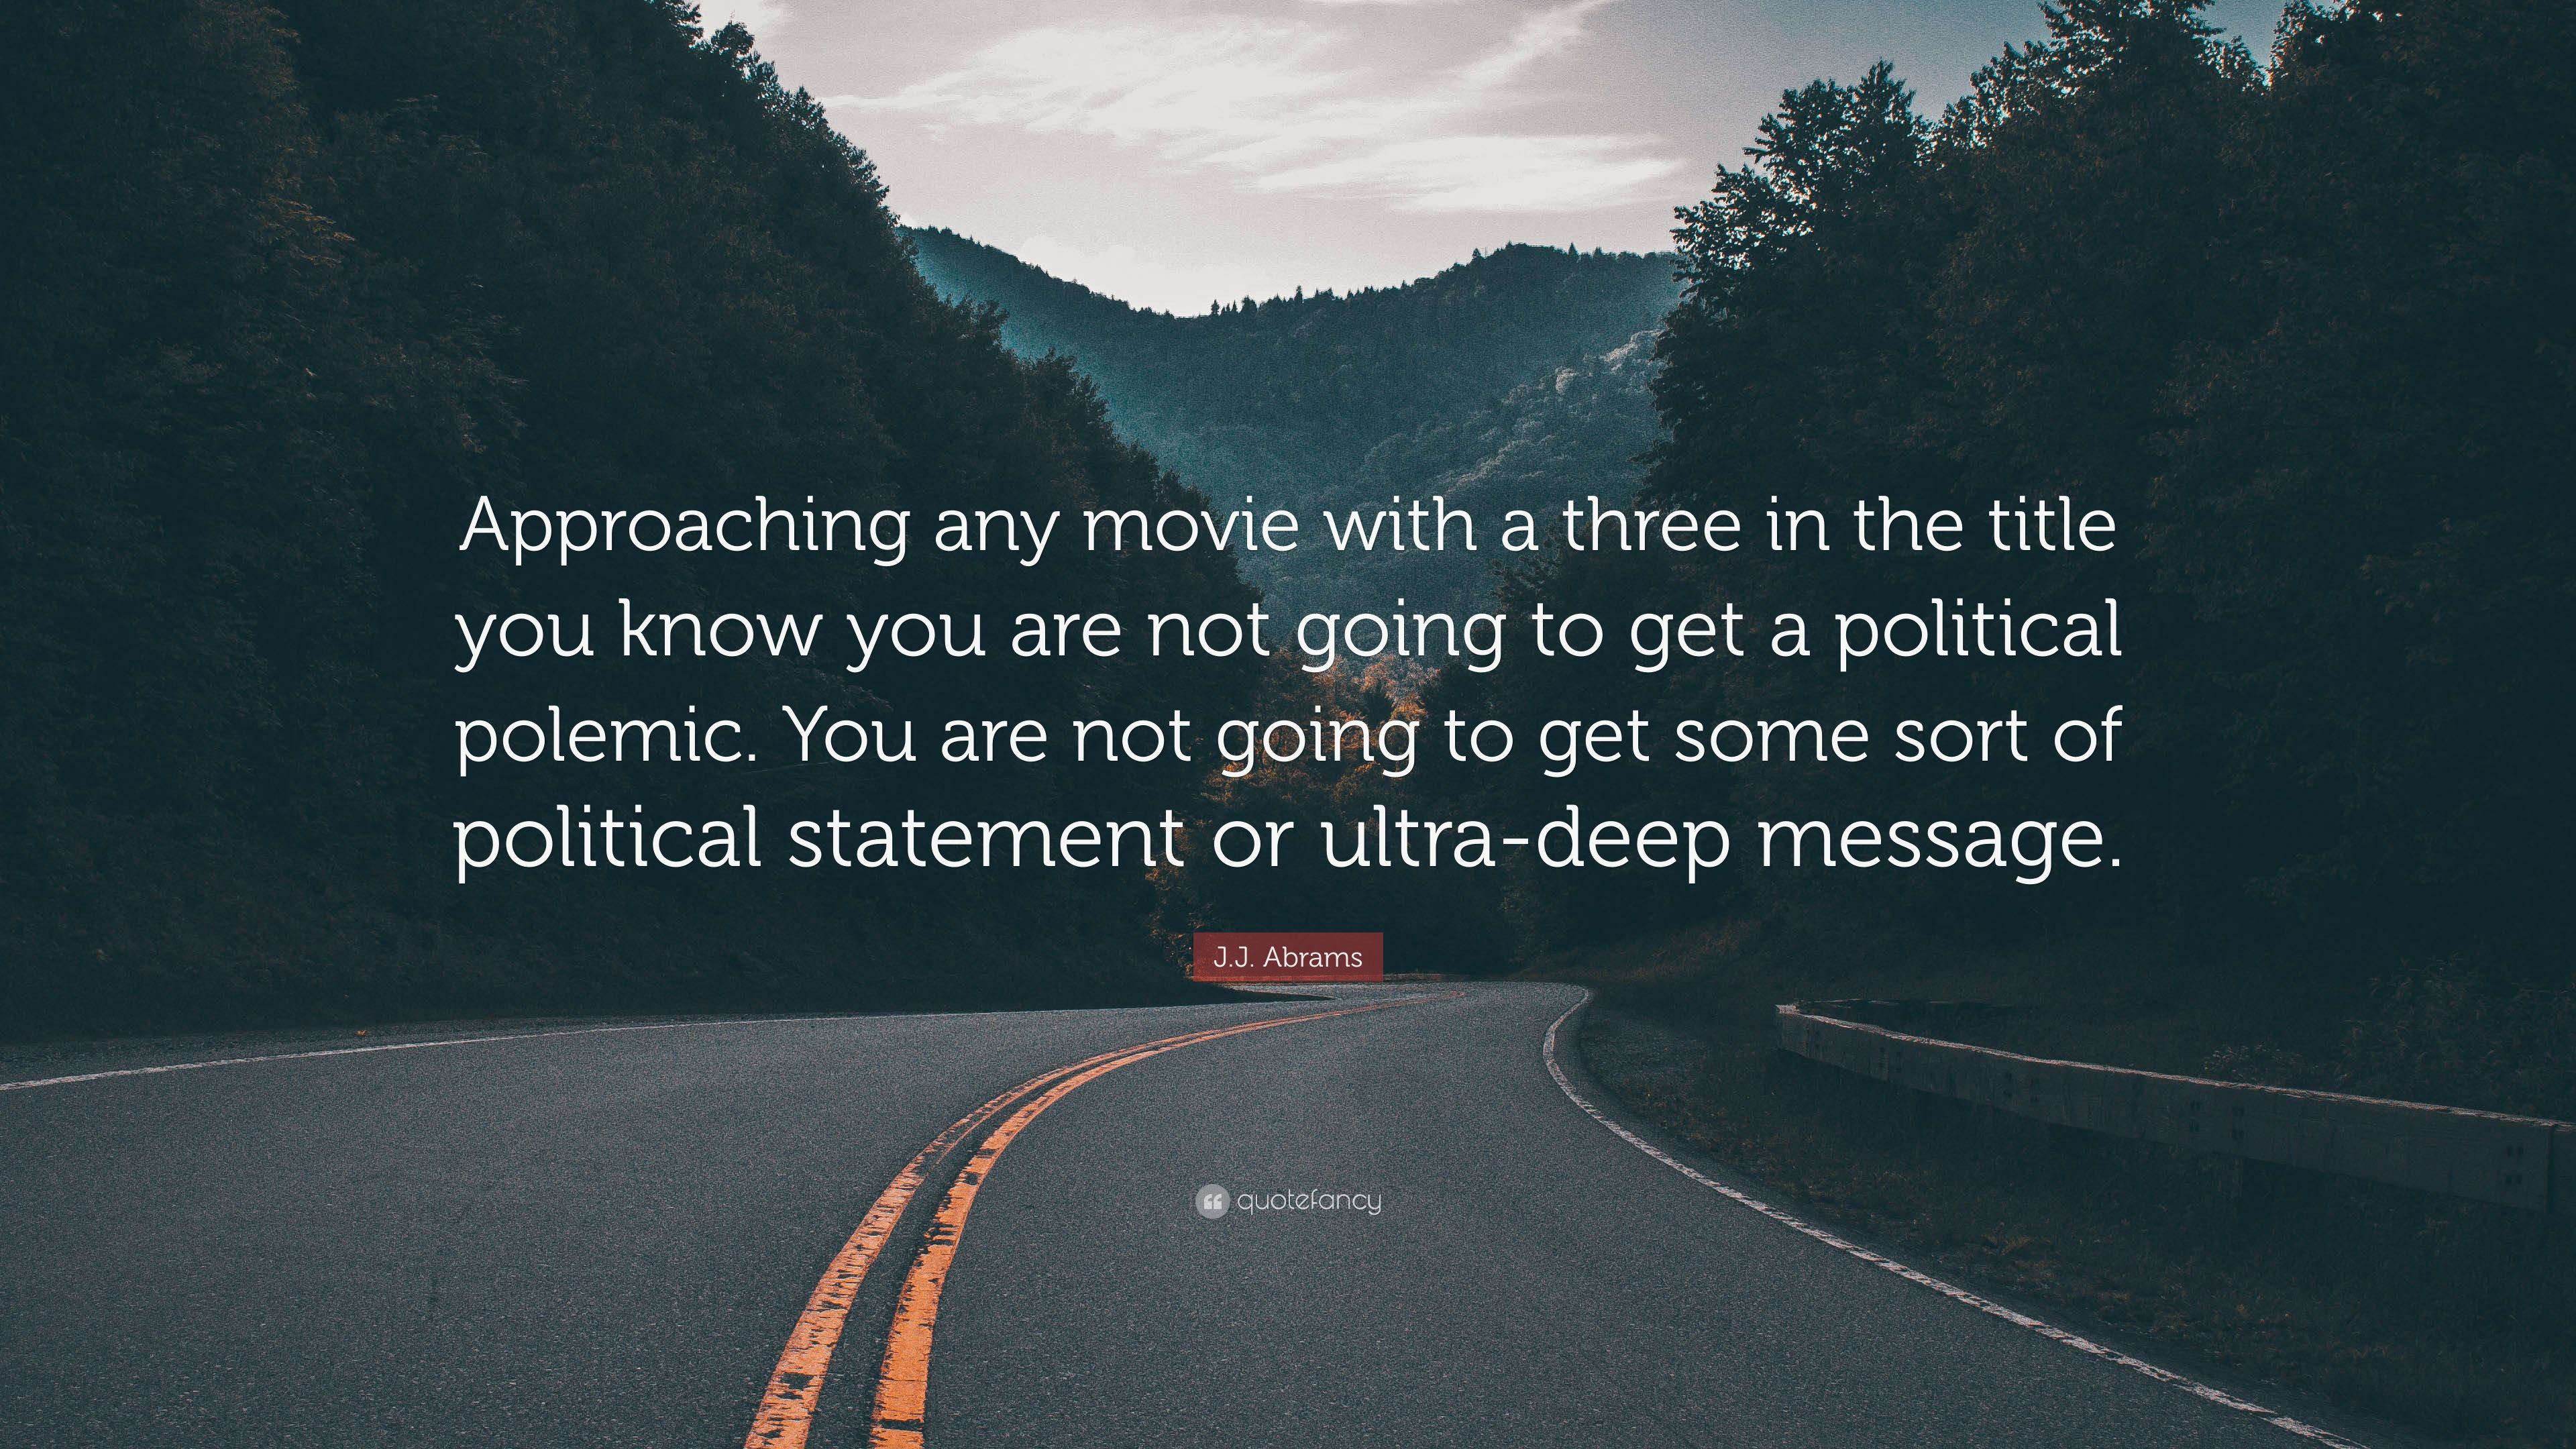 J.J. Abrams Quote: “Approaching any movie with a three in